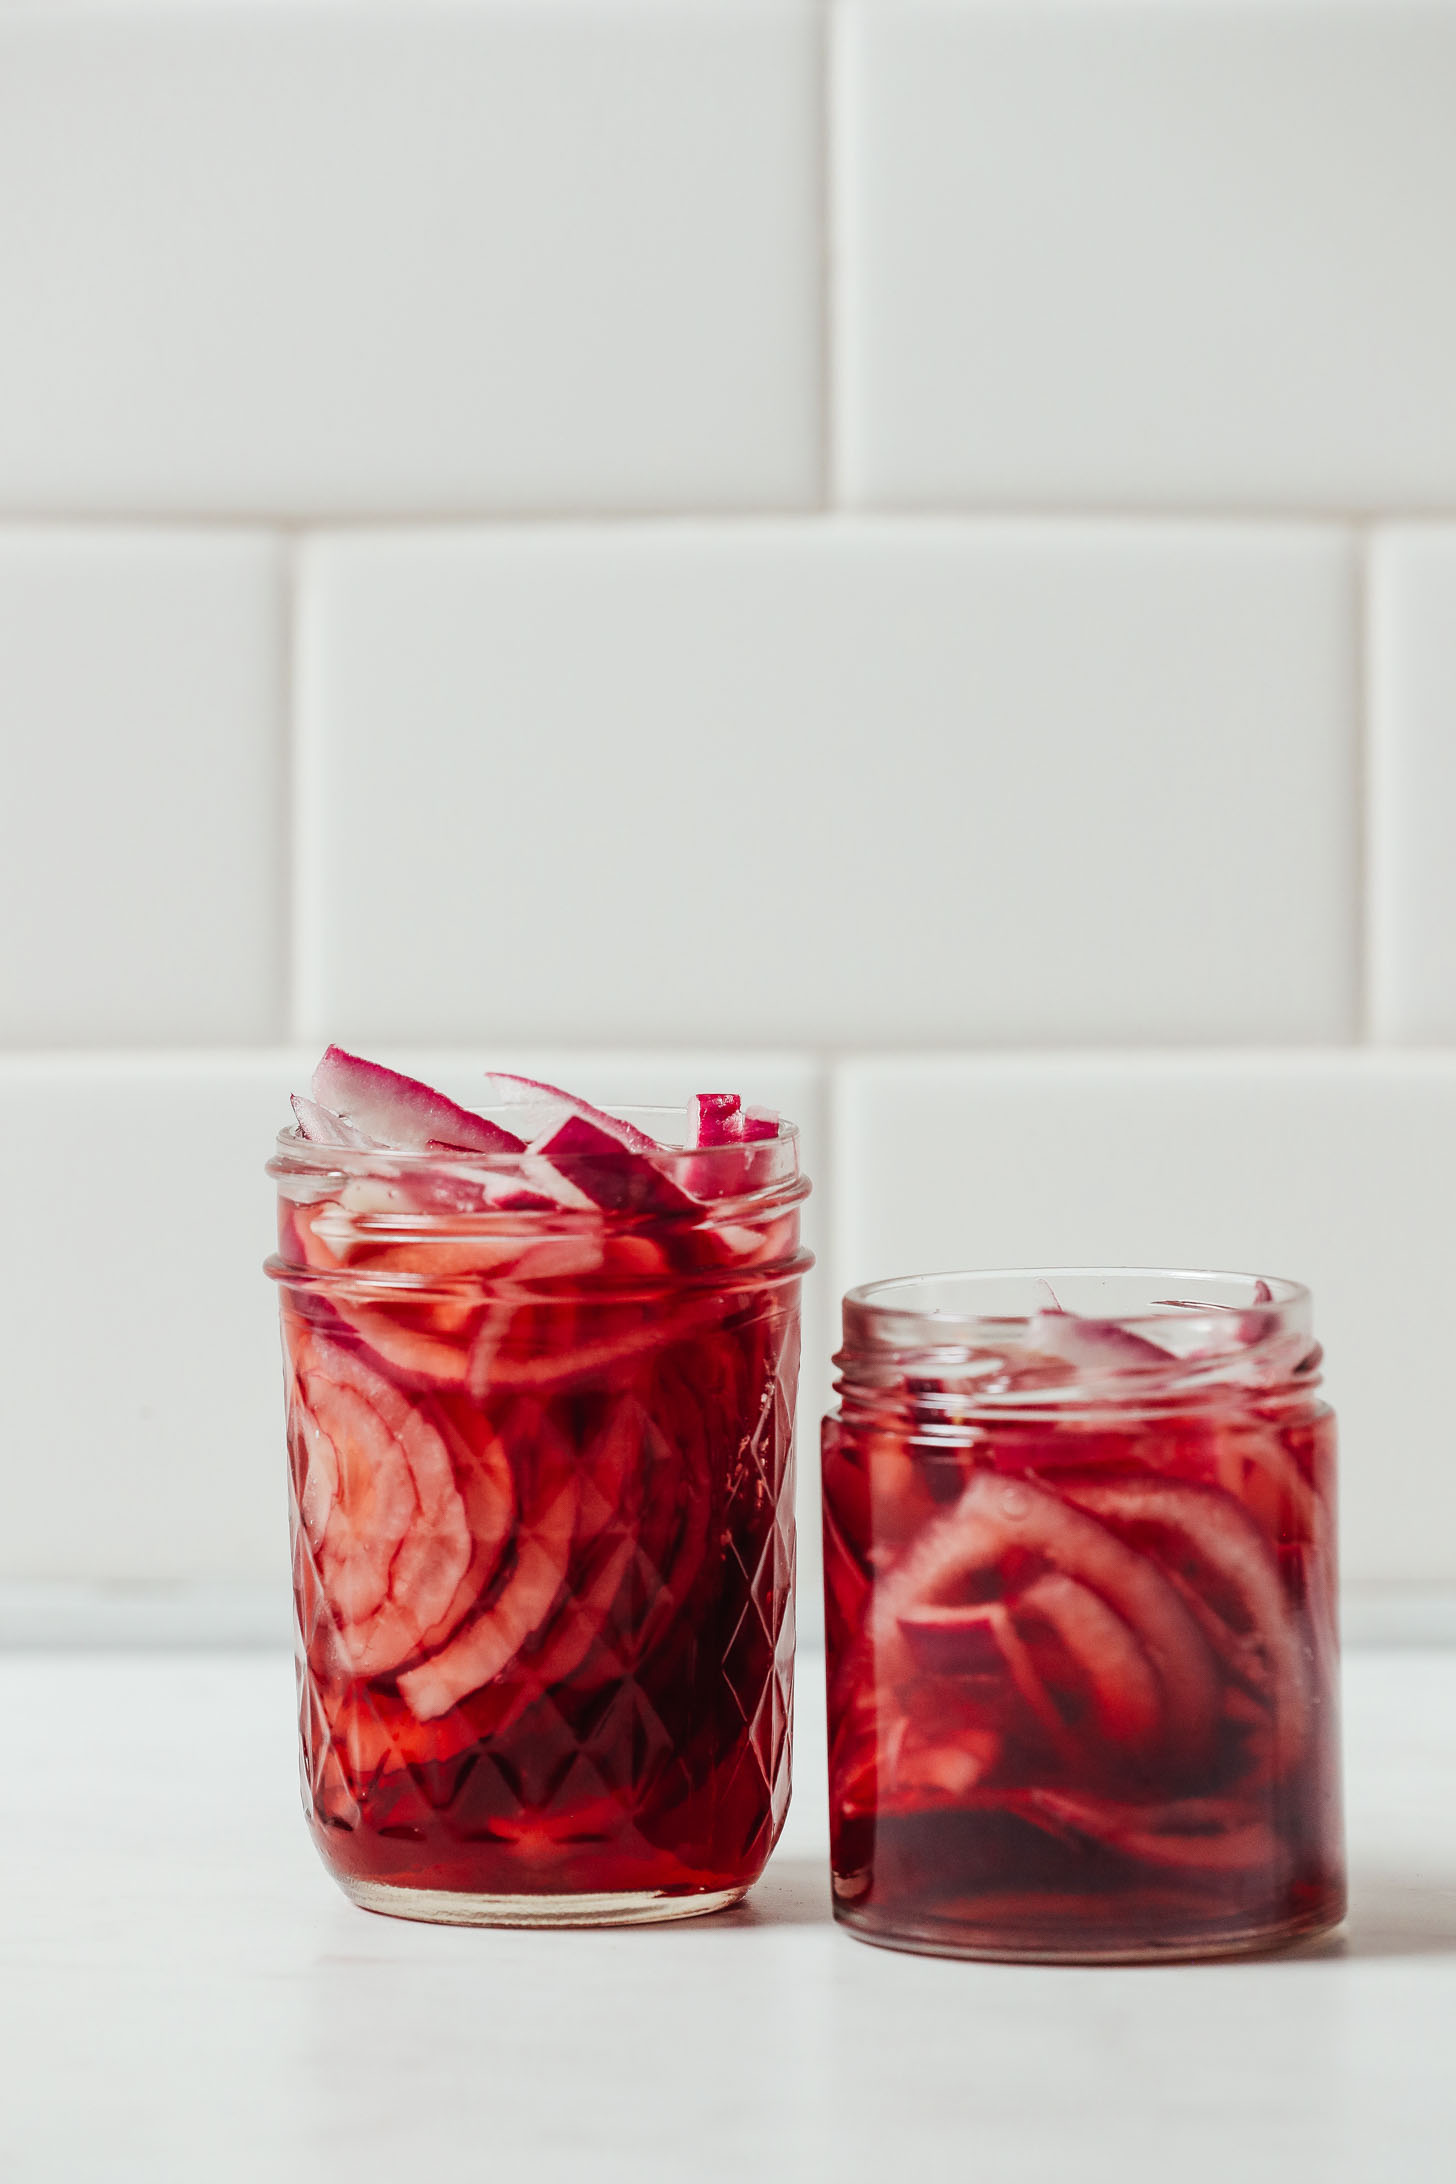 Two small jars of our Quick Pickled Onions recipe